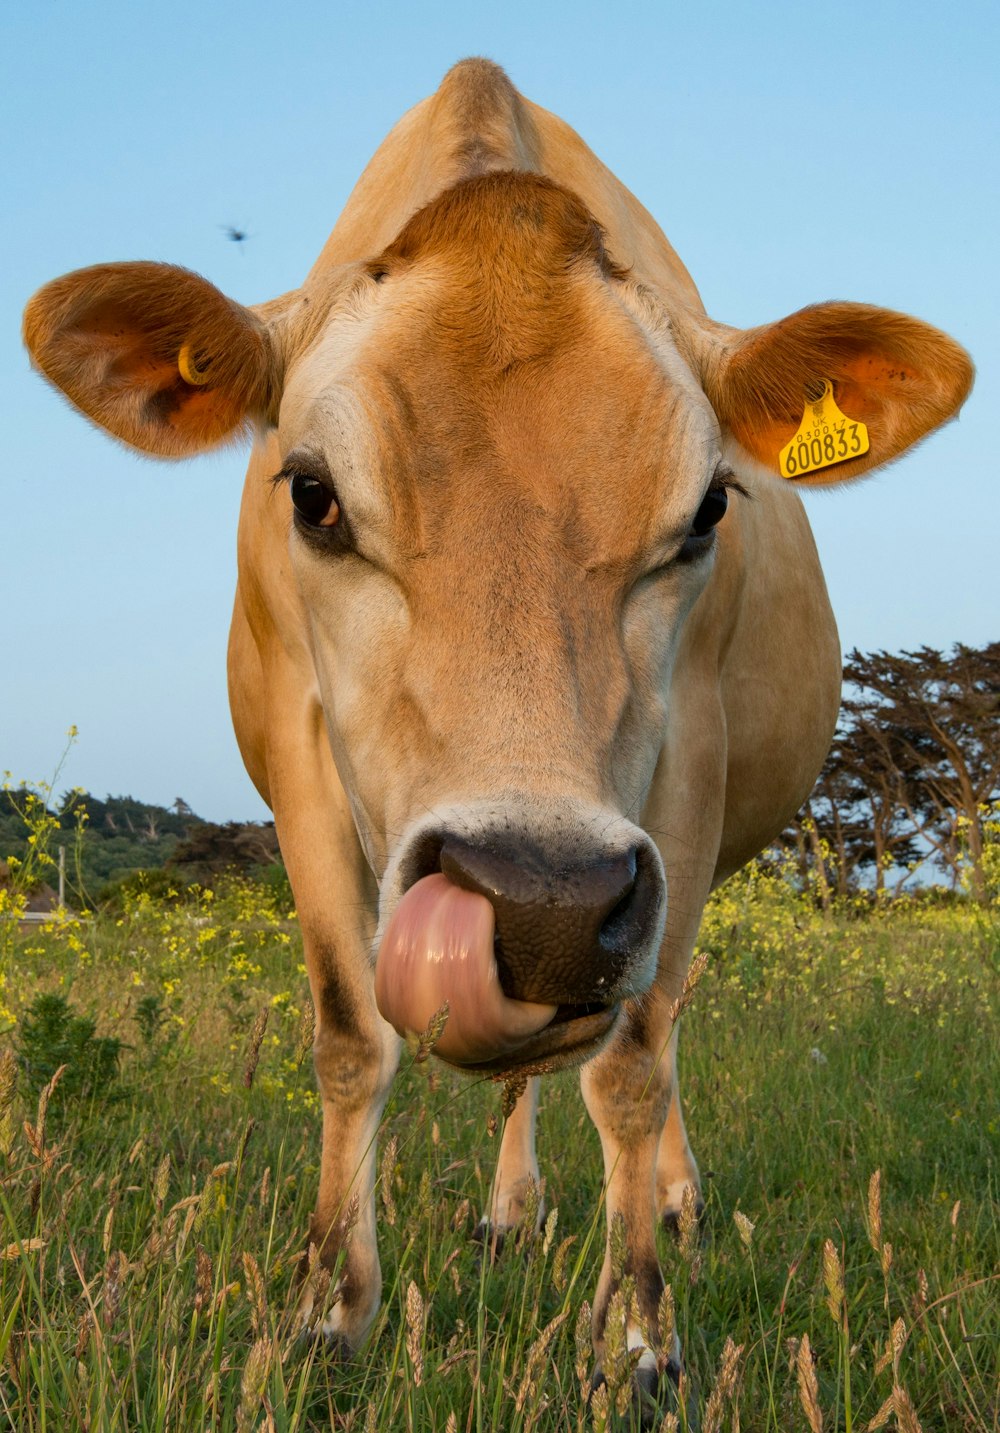 a cow with a yellow tag on its ear